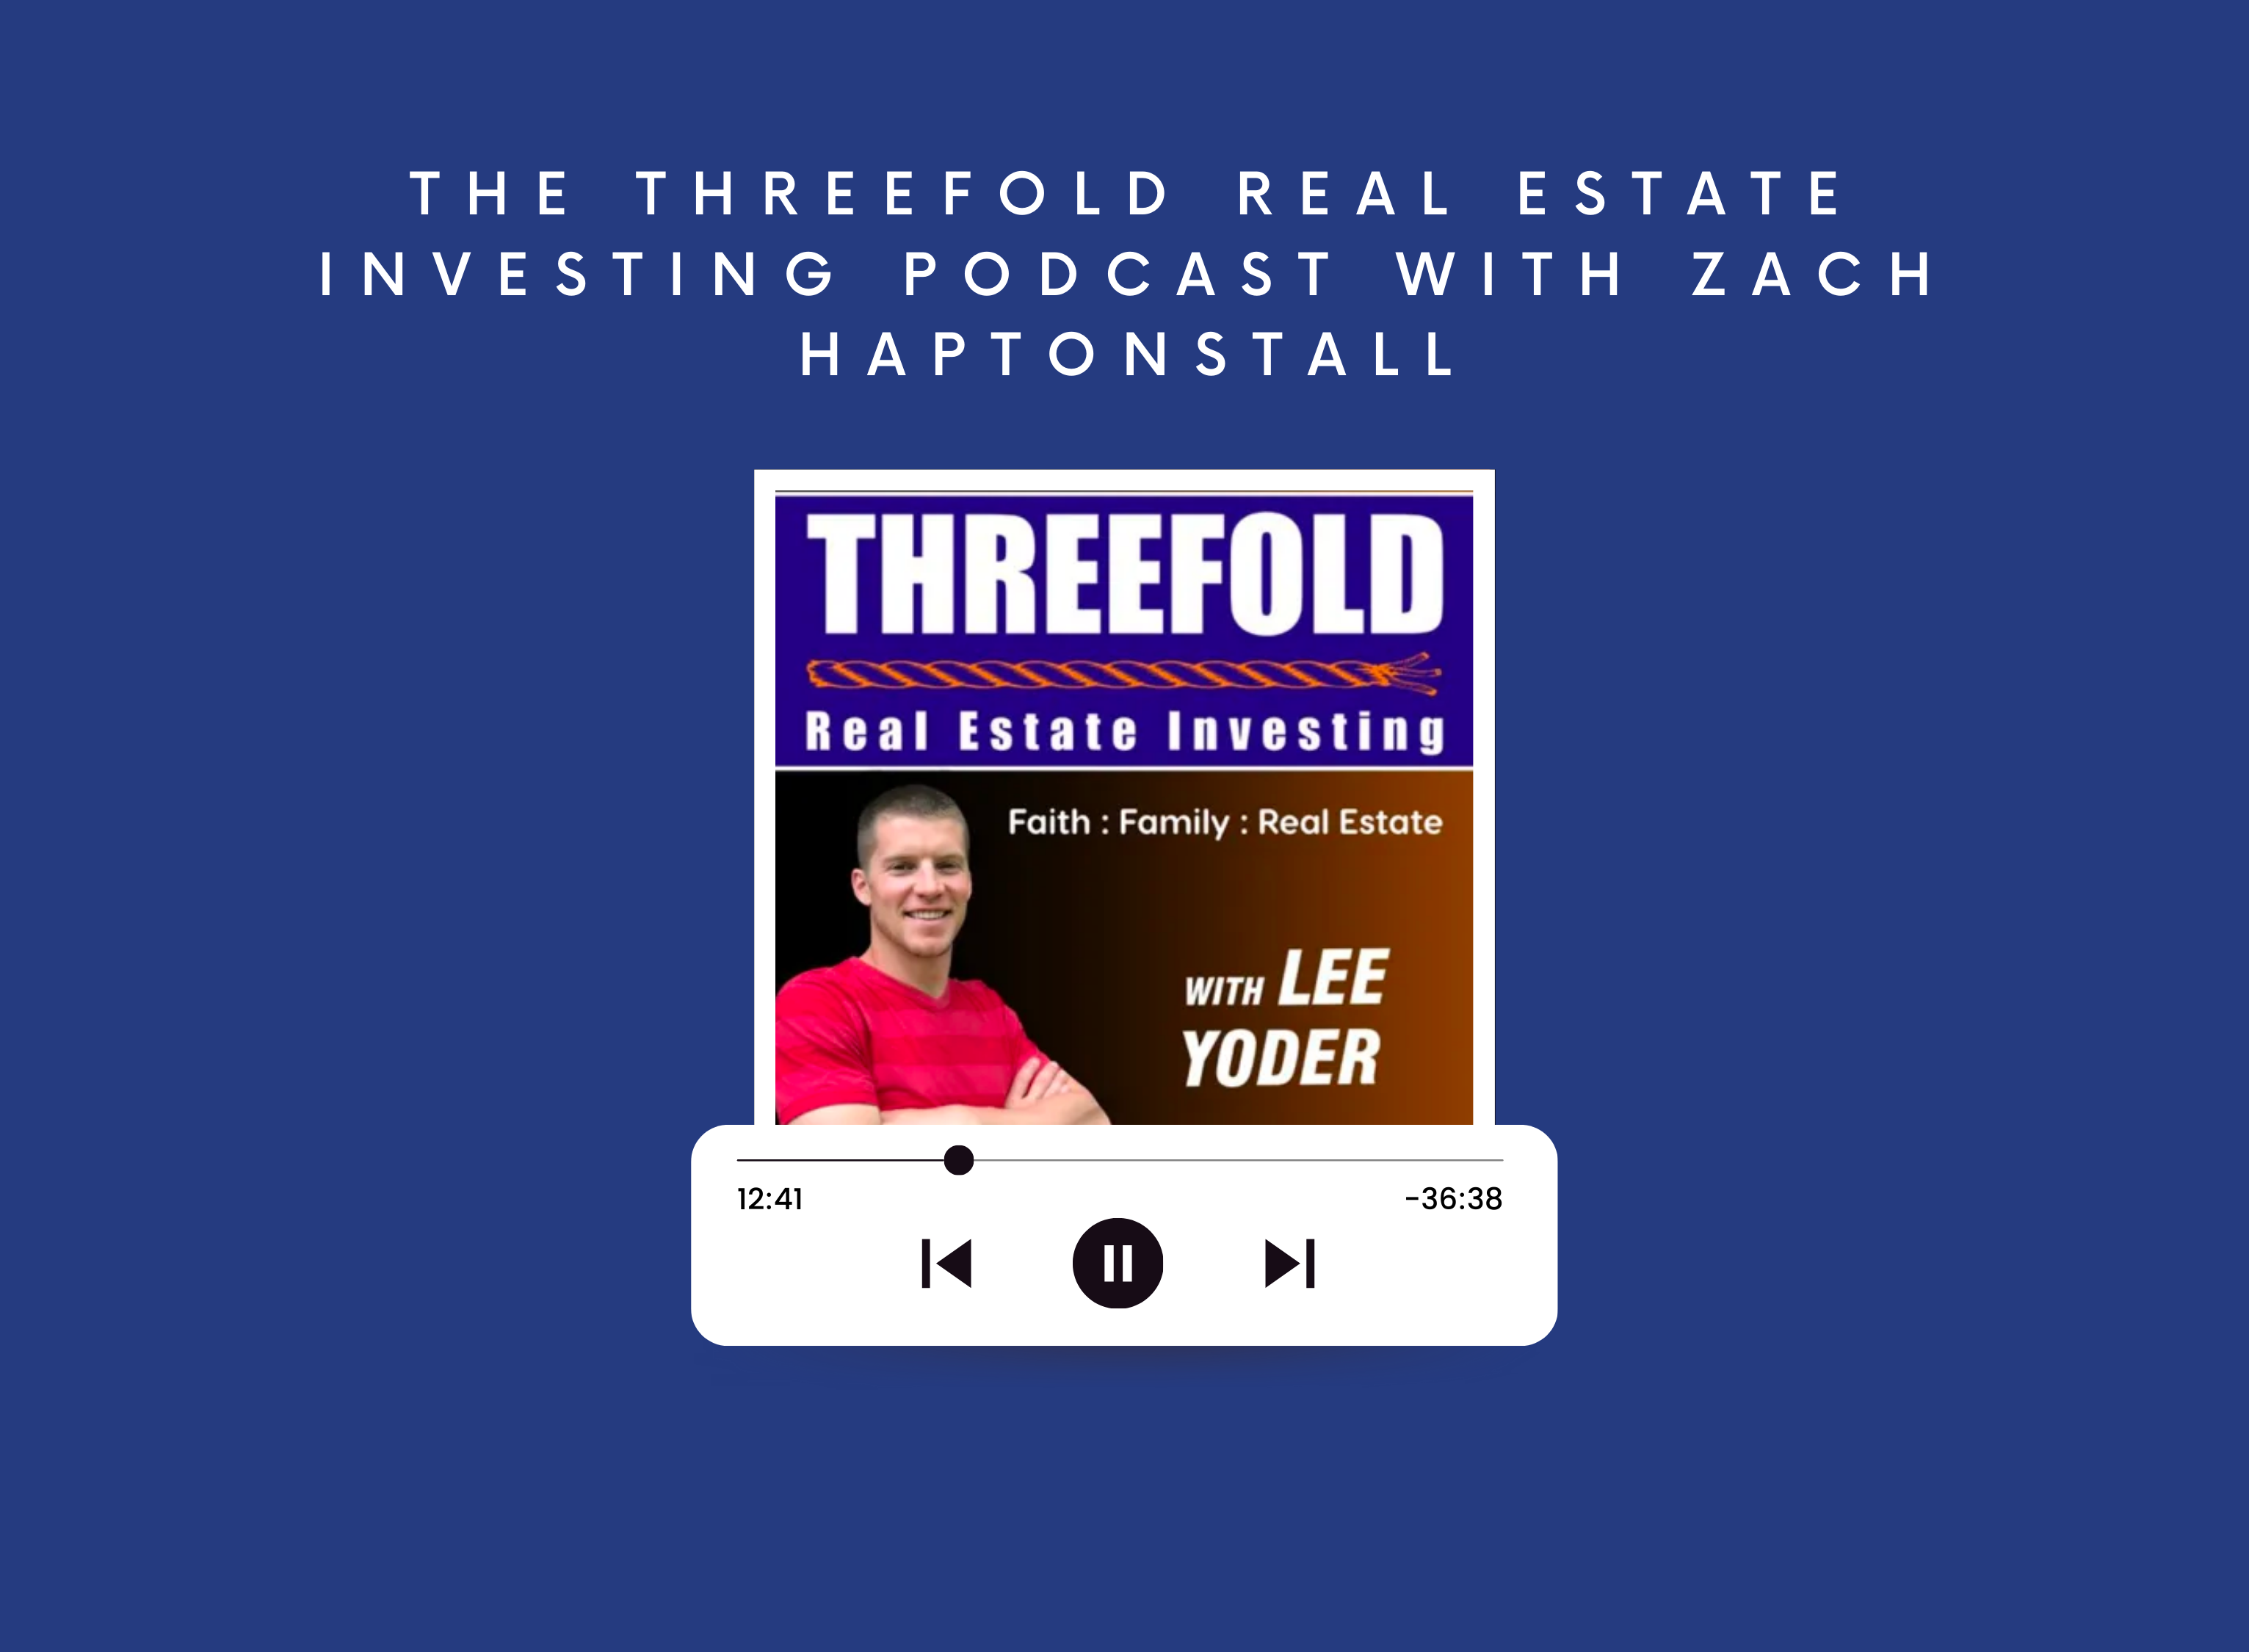 The Threefold Real Estate Investing Podcast